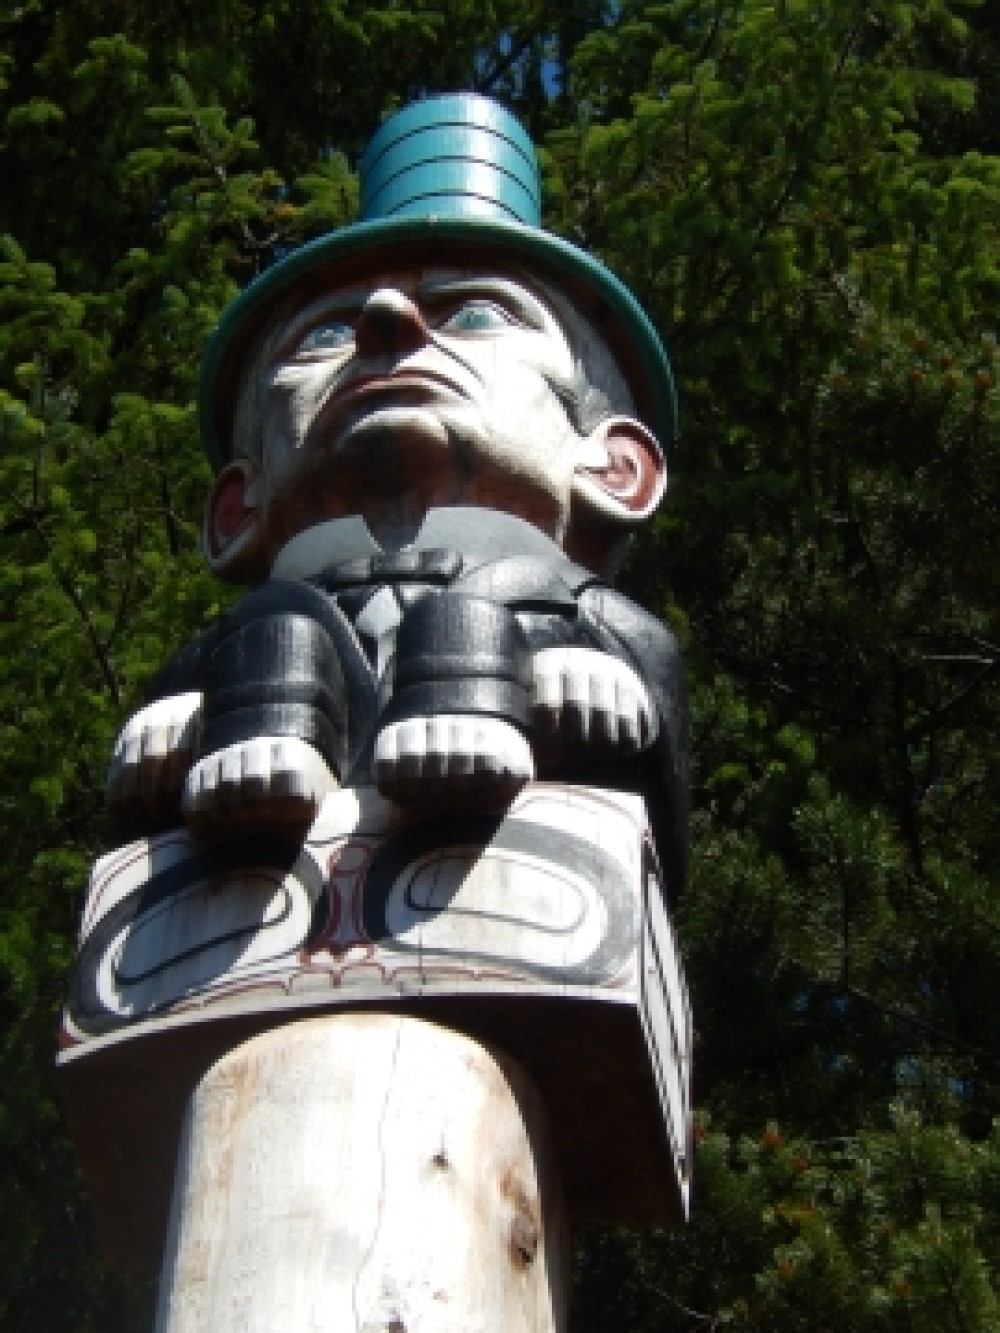 Abe Lincoln on Totem Pole